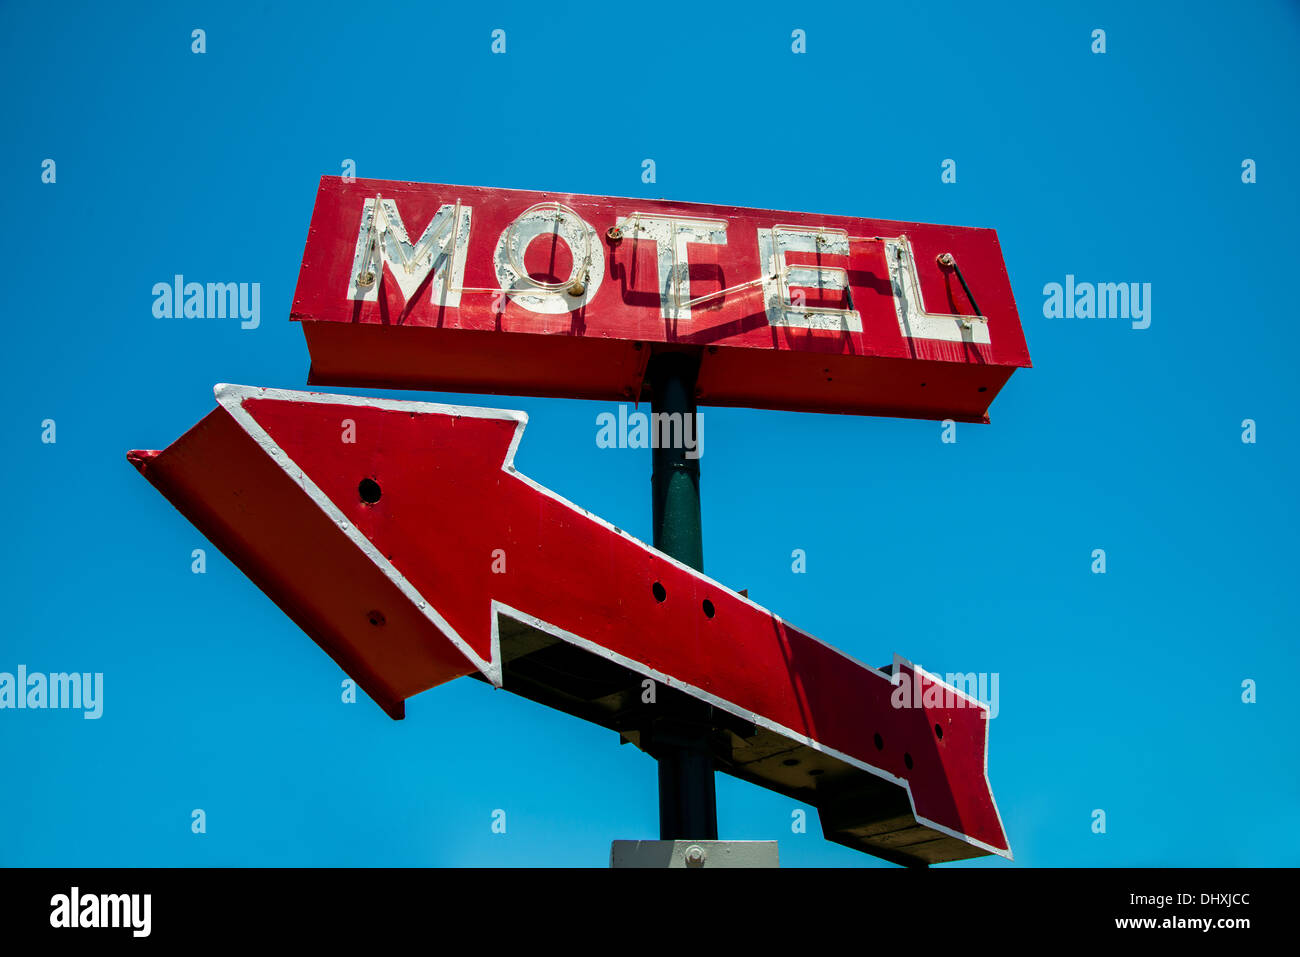 A vintage red neon hotel sign with a red arrow and a sky blue background Stock Photo